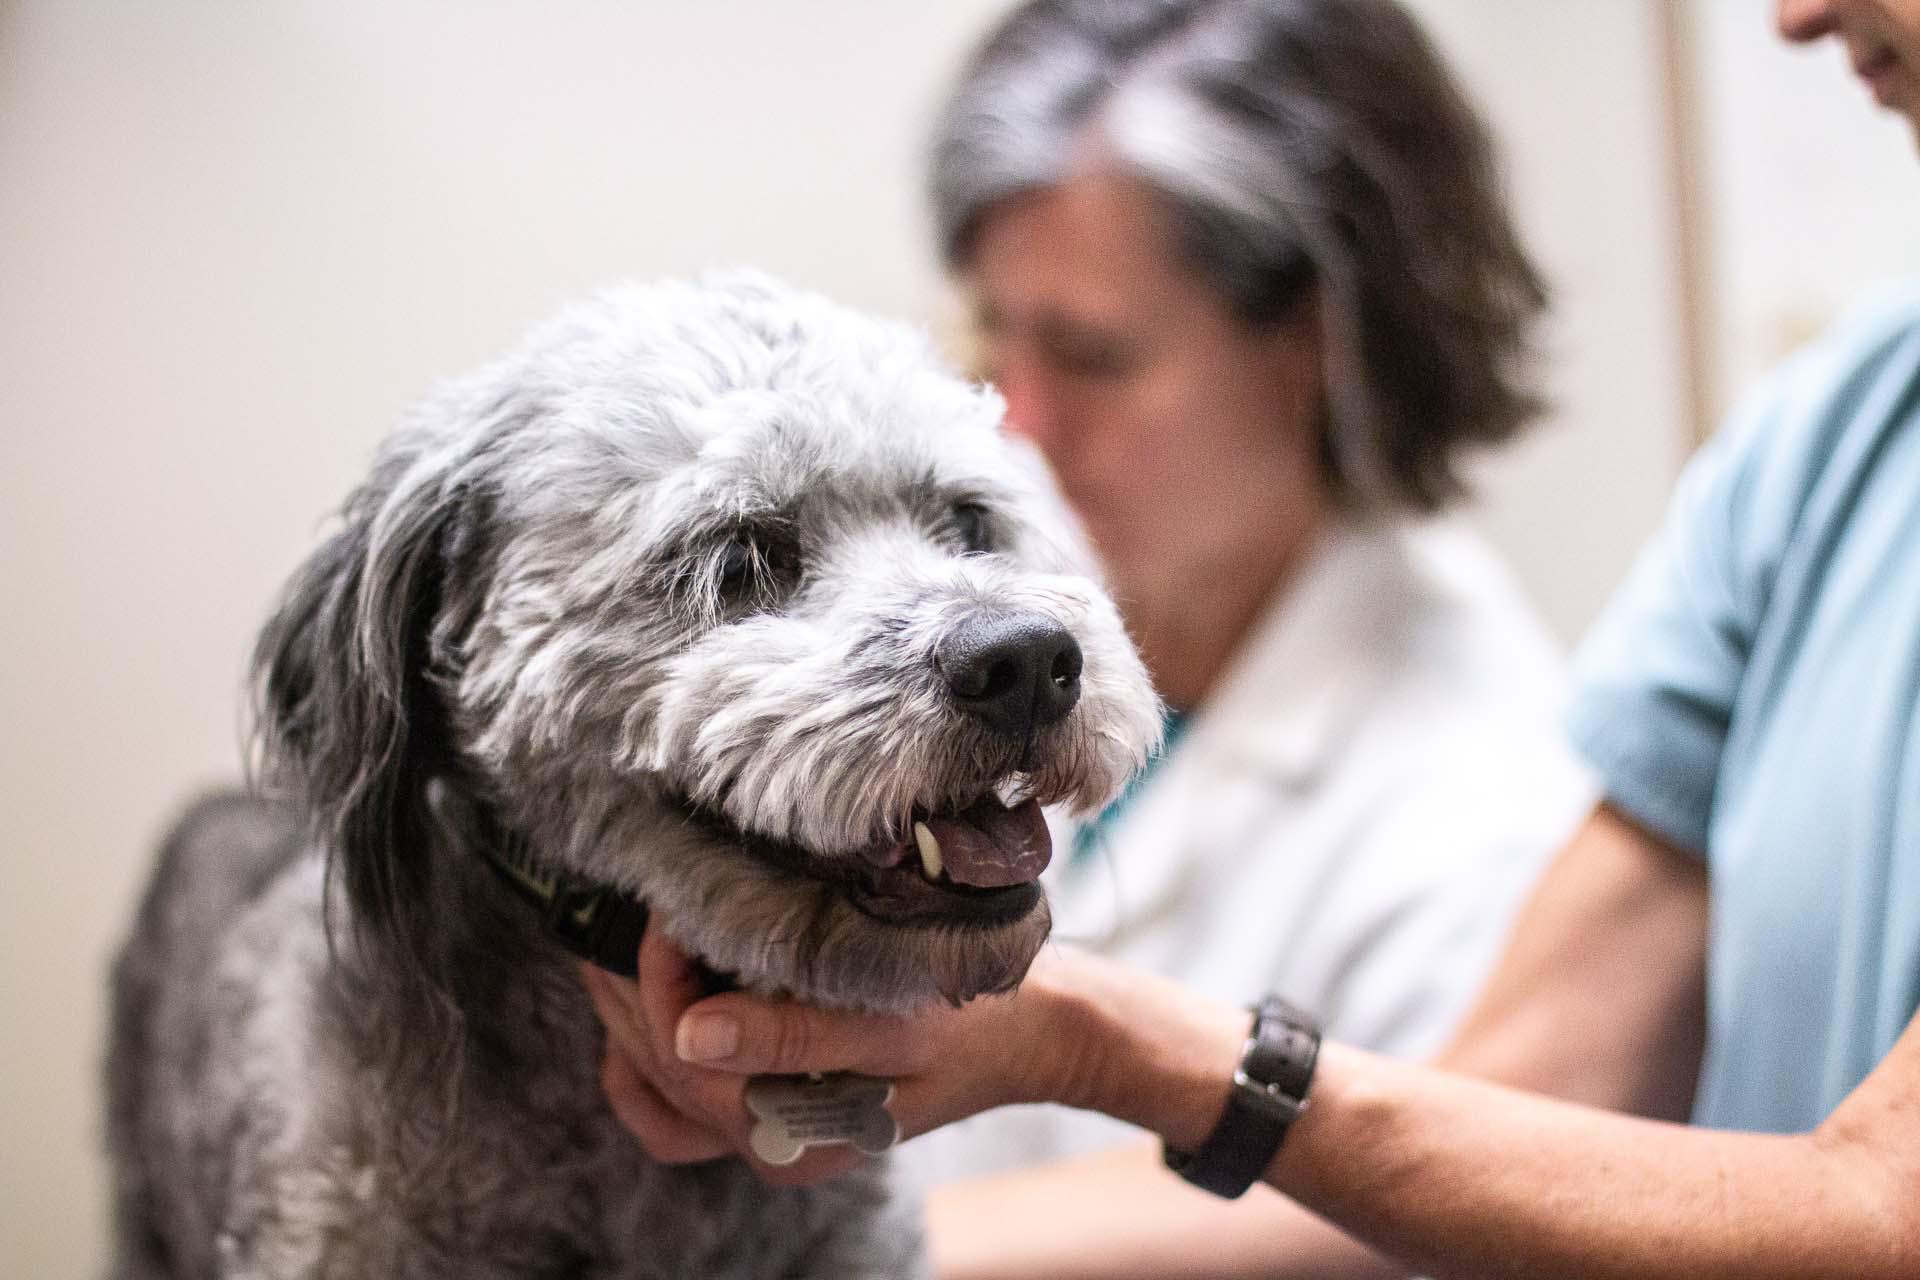 This sweet pup looks ready for a tip-of-the-nose to a tip-of-the-tail exam!